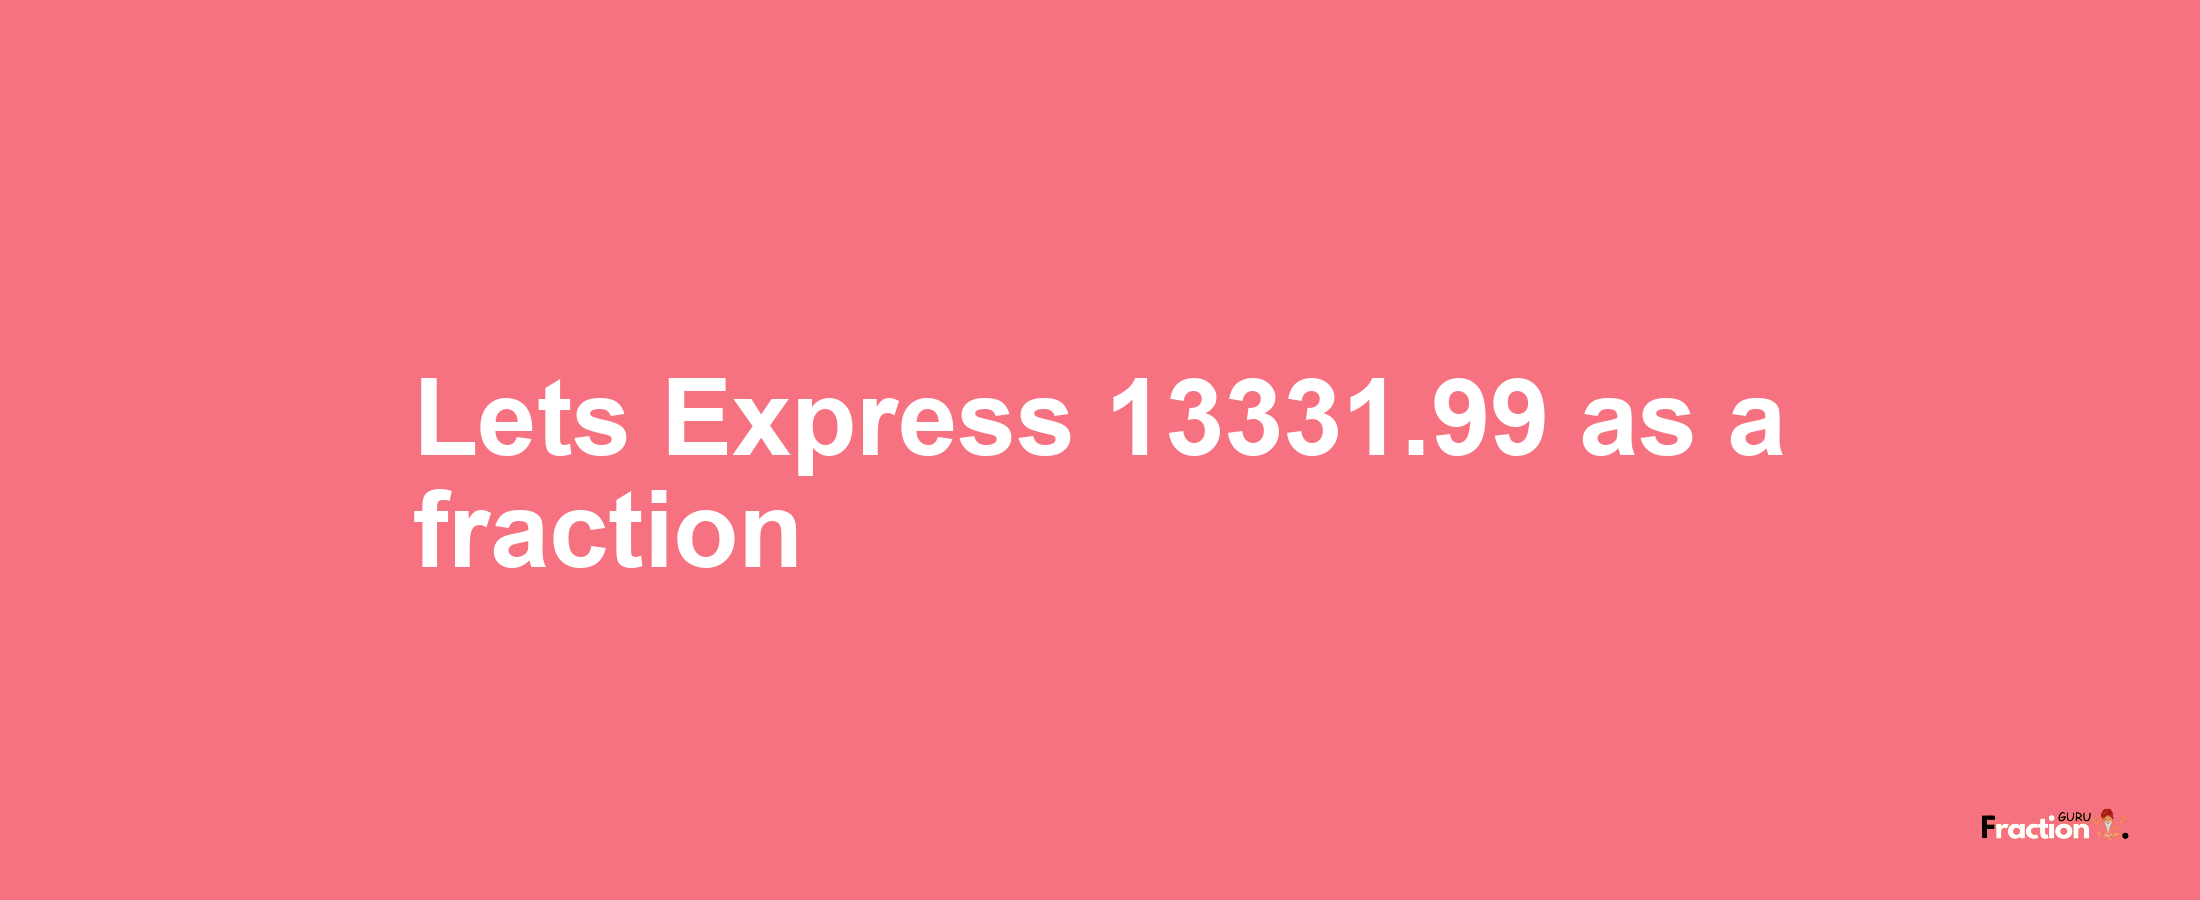 Lets Express 13331.99 as afraction